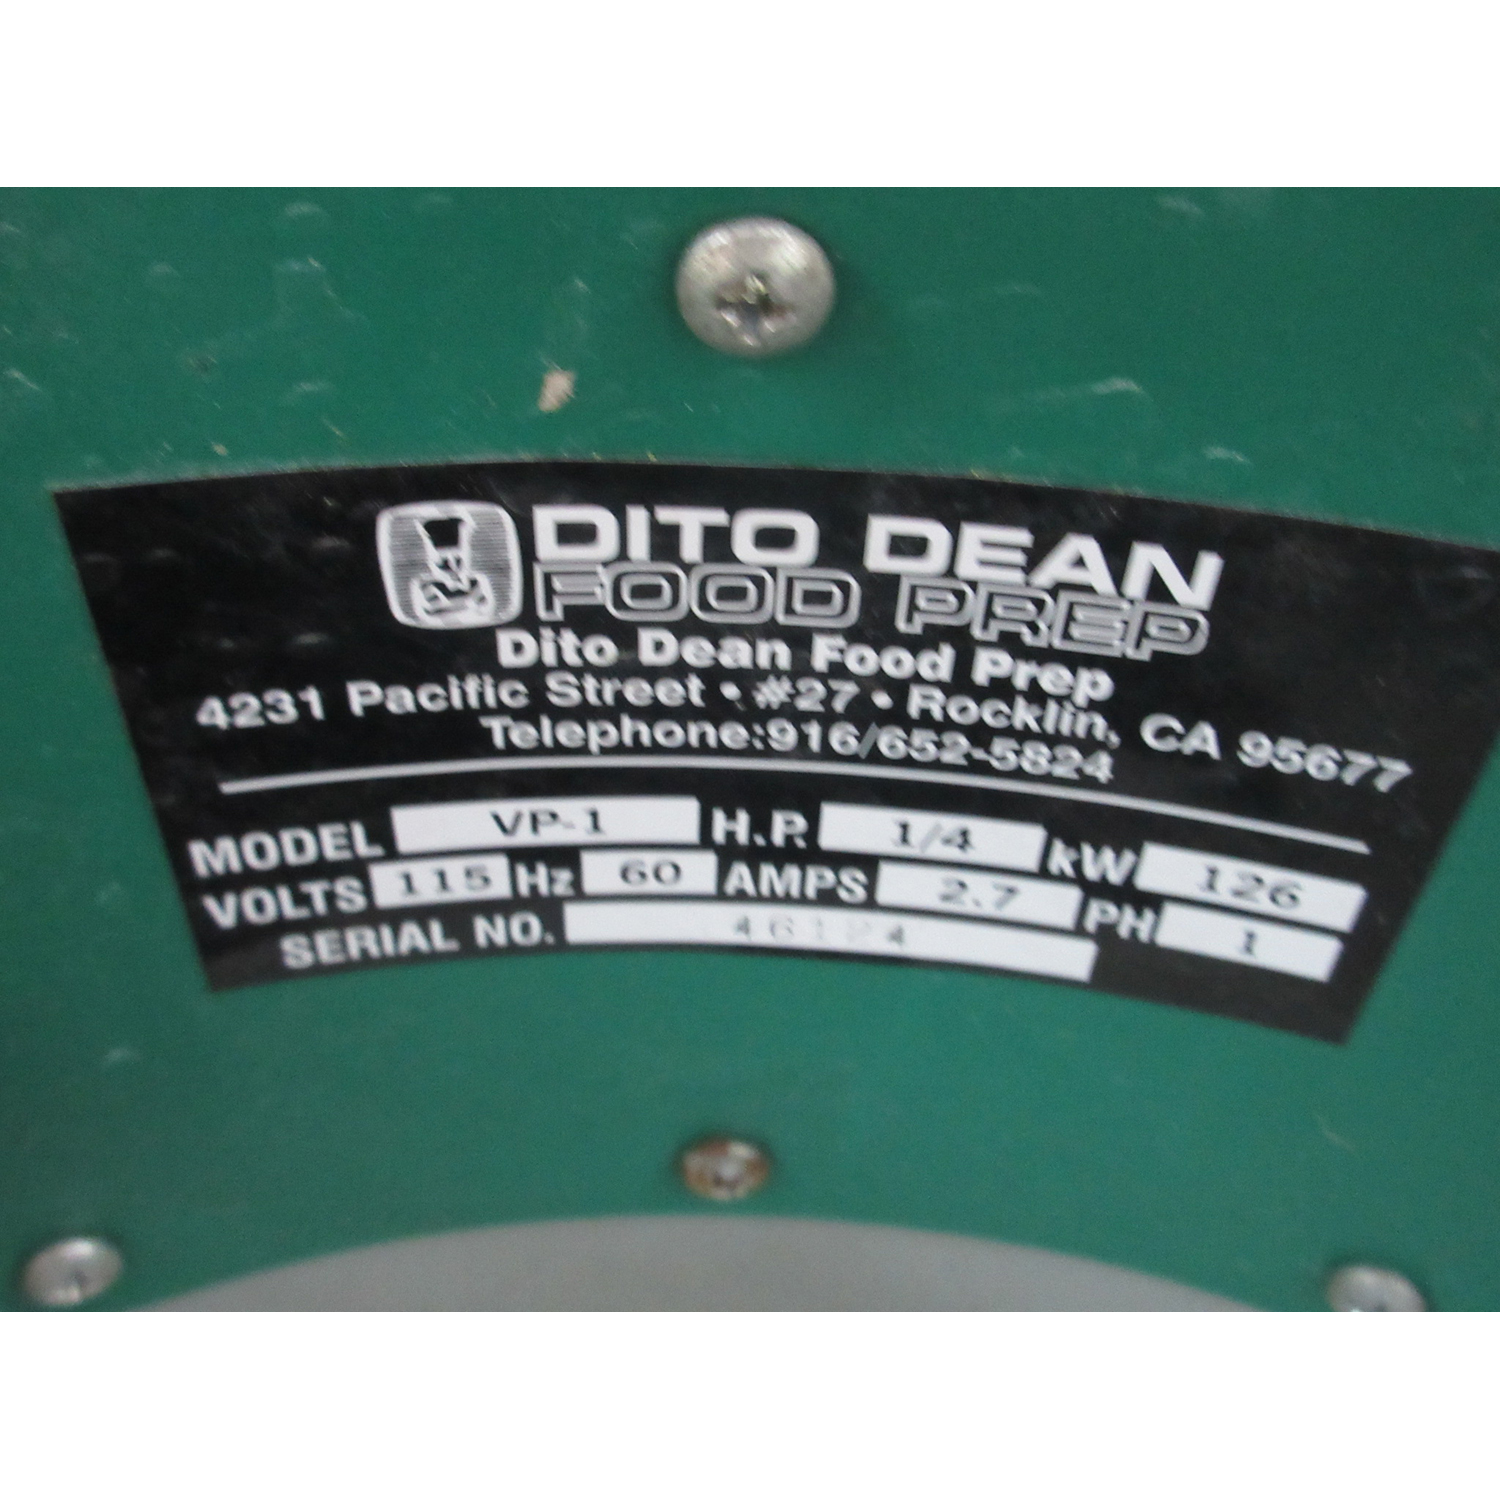 Dito-Dean VP1 Salad Spinner, Used Excellent Condition image 4